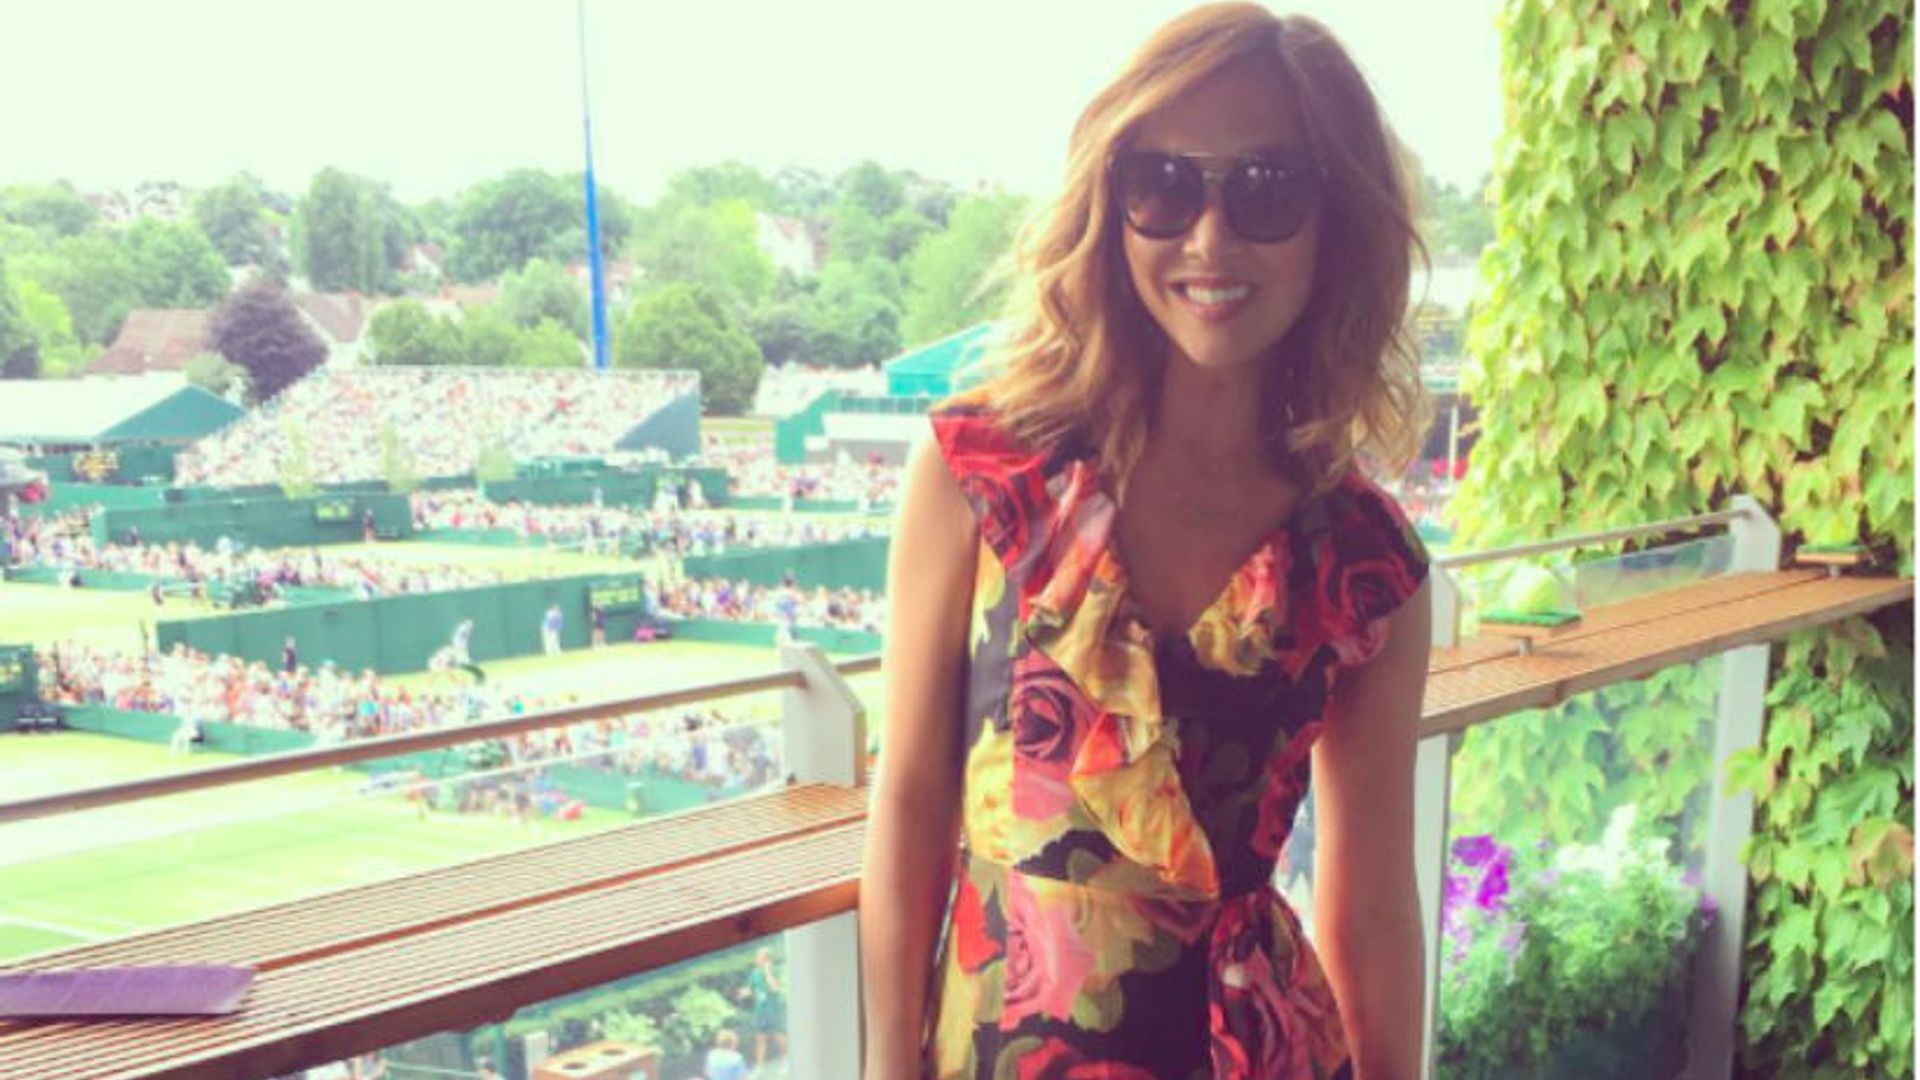 Myleene Klass enjoys a day out to Wimbledon in £80 floral dress from her Littlewoods Collection